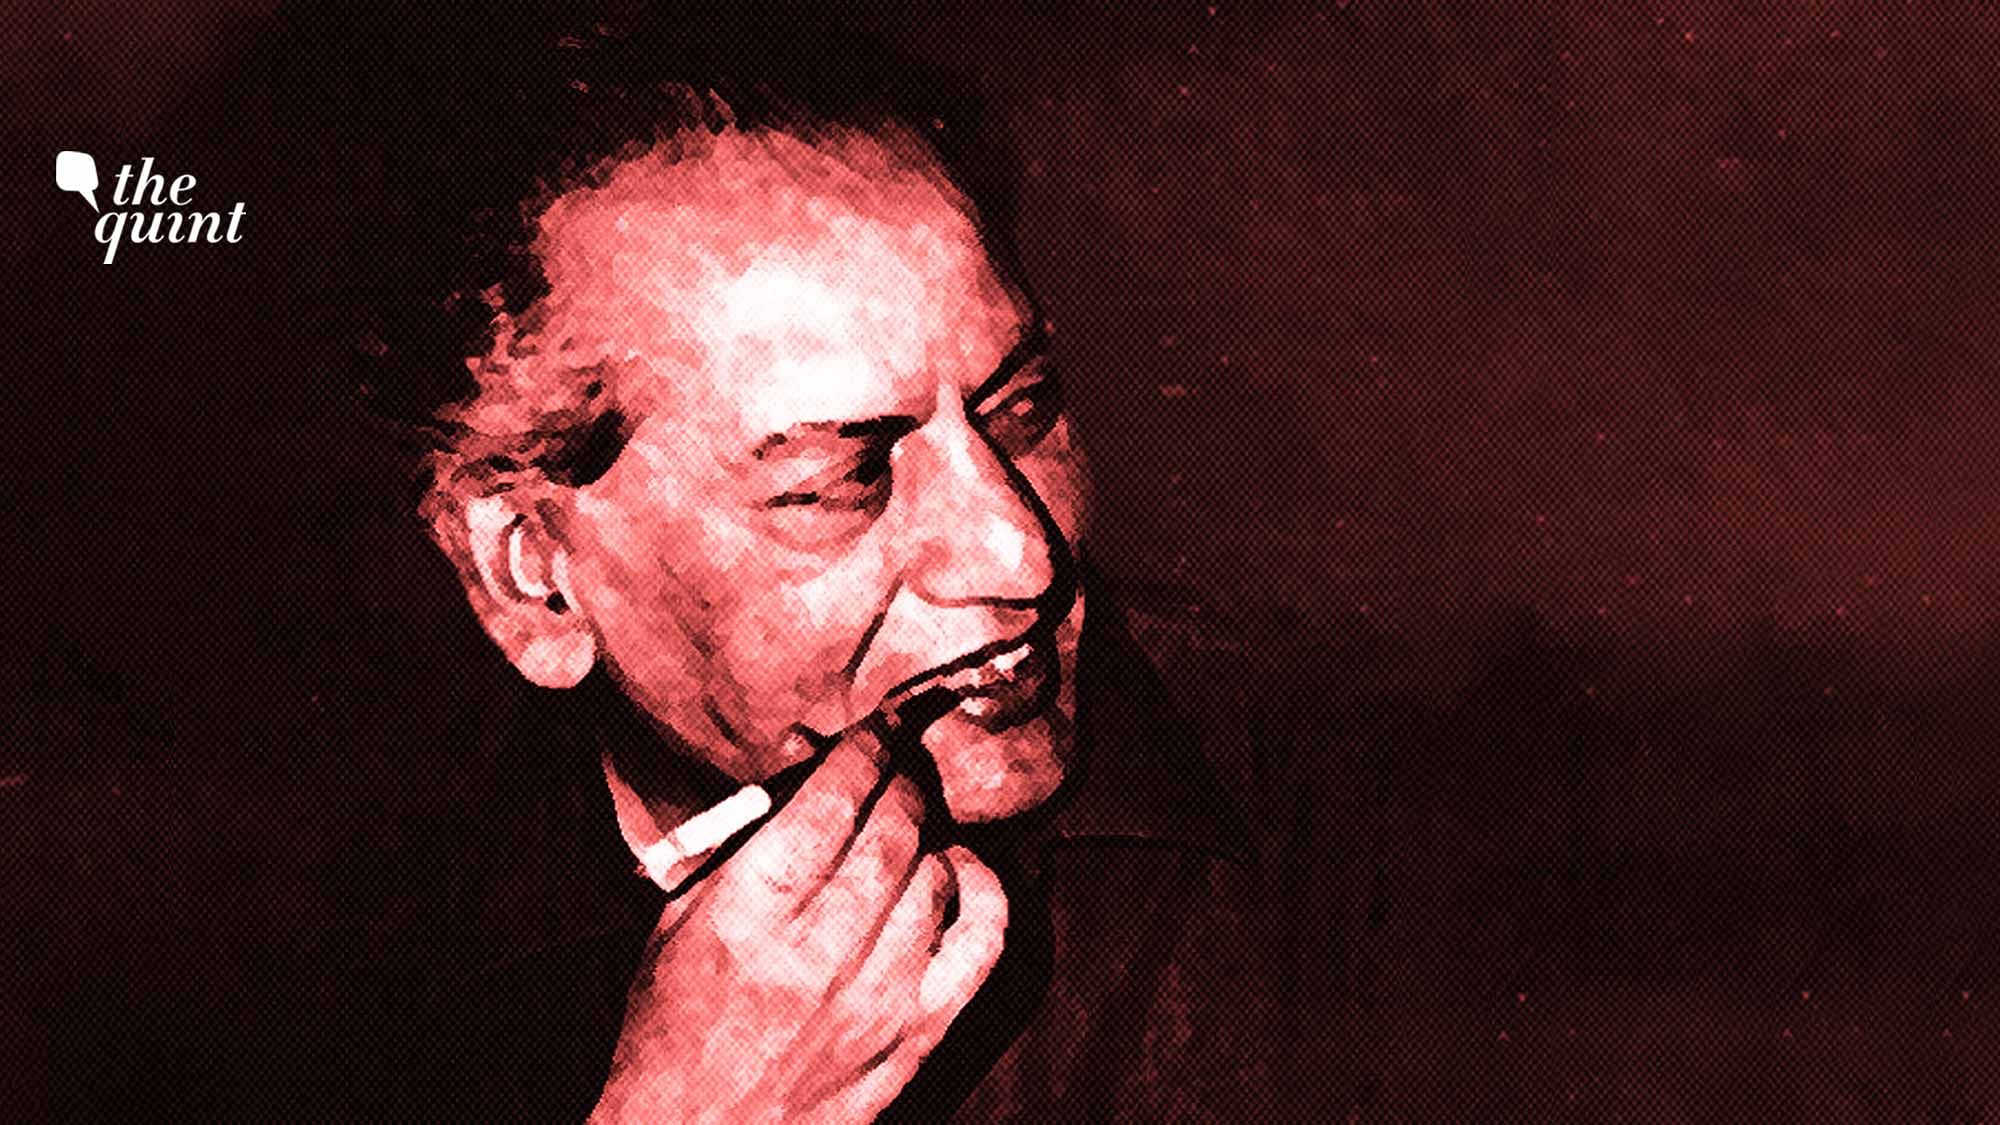 Faiz was well-versed in the idiom of multiple religions and did not hesitate in using religious imagery in his poetry.